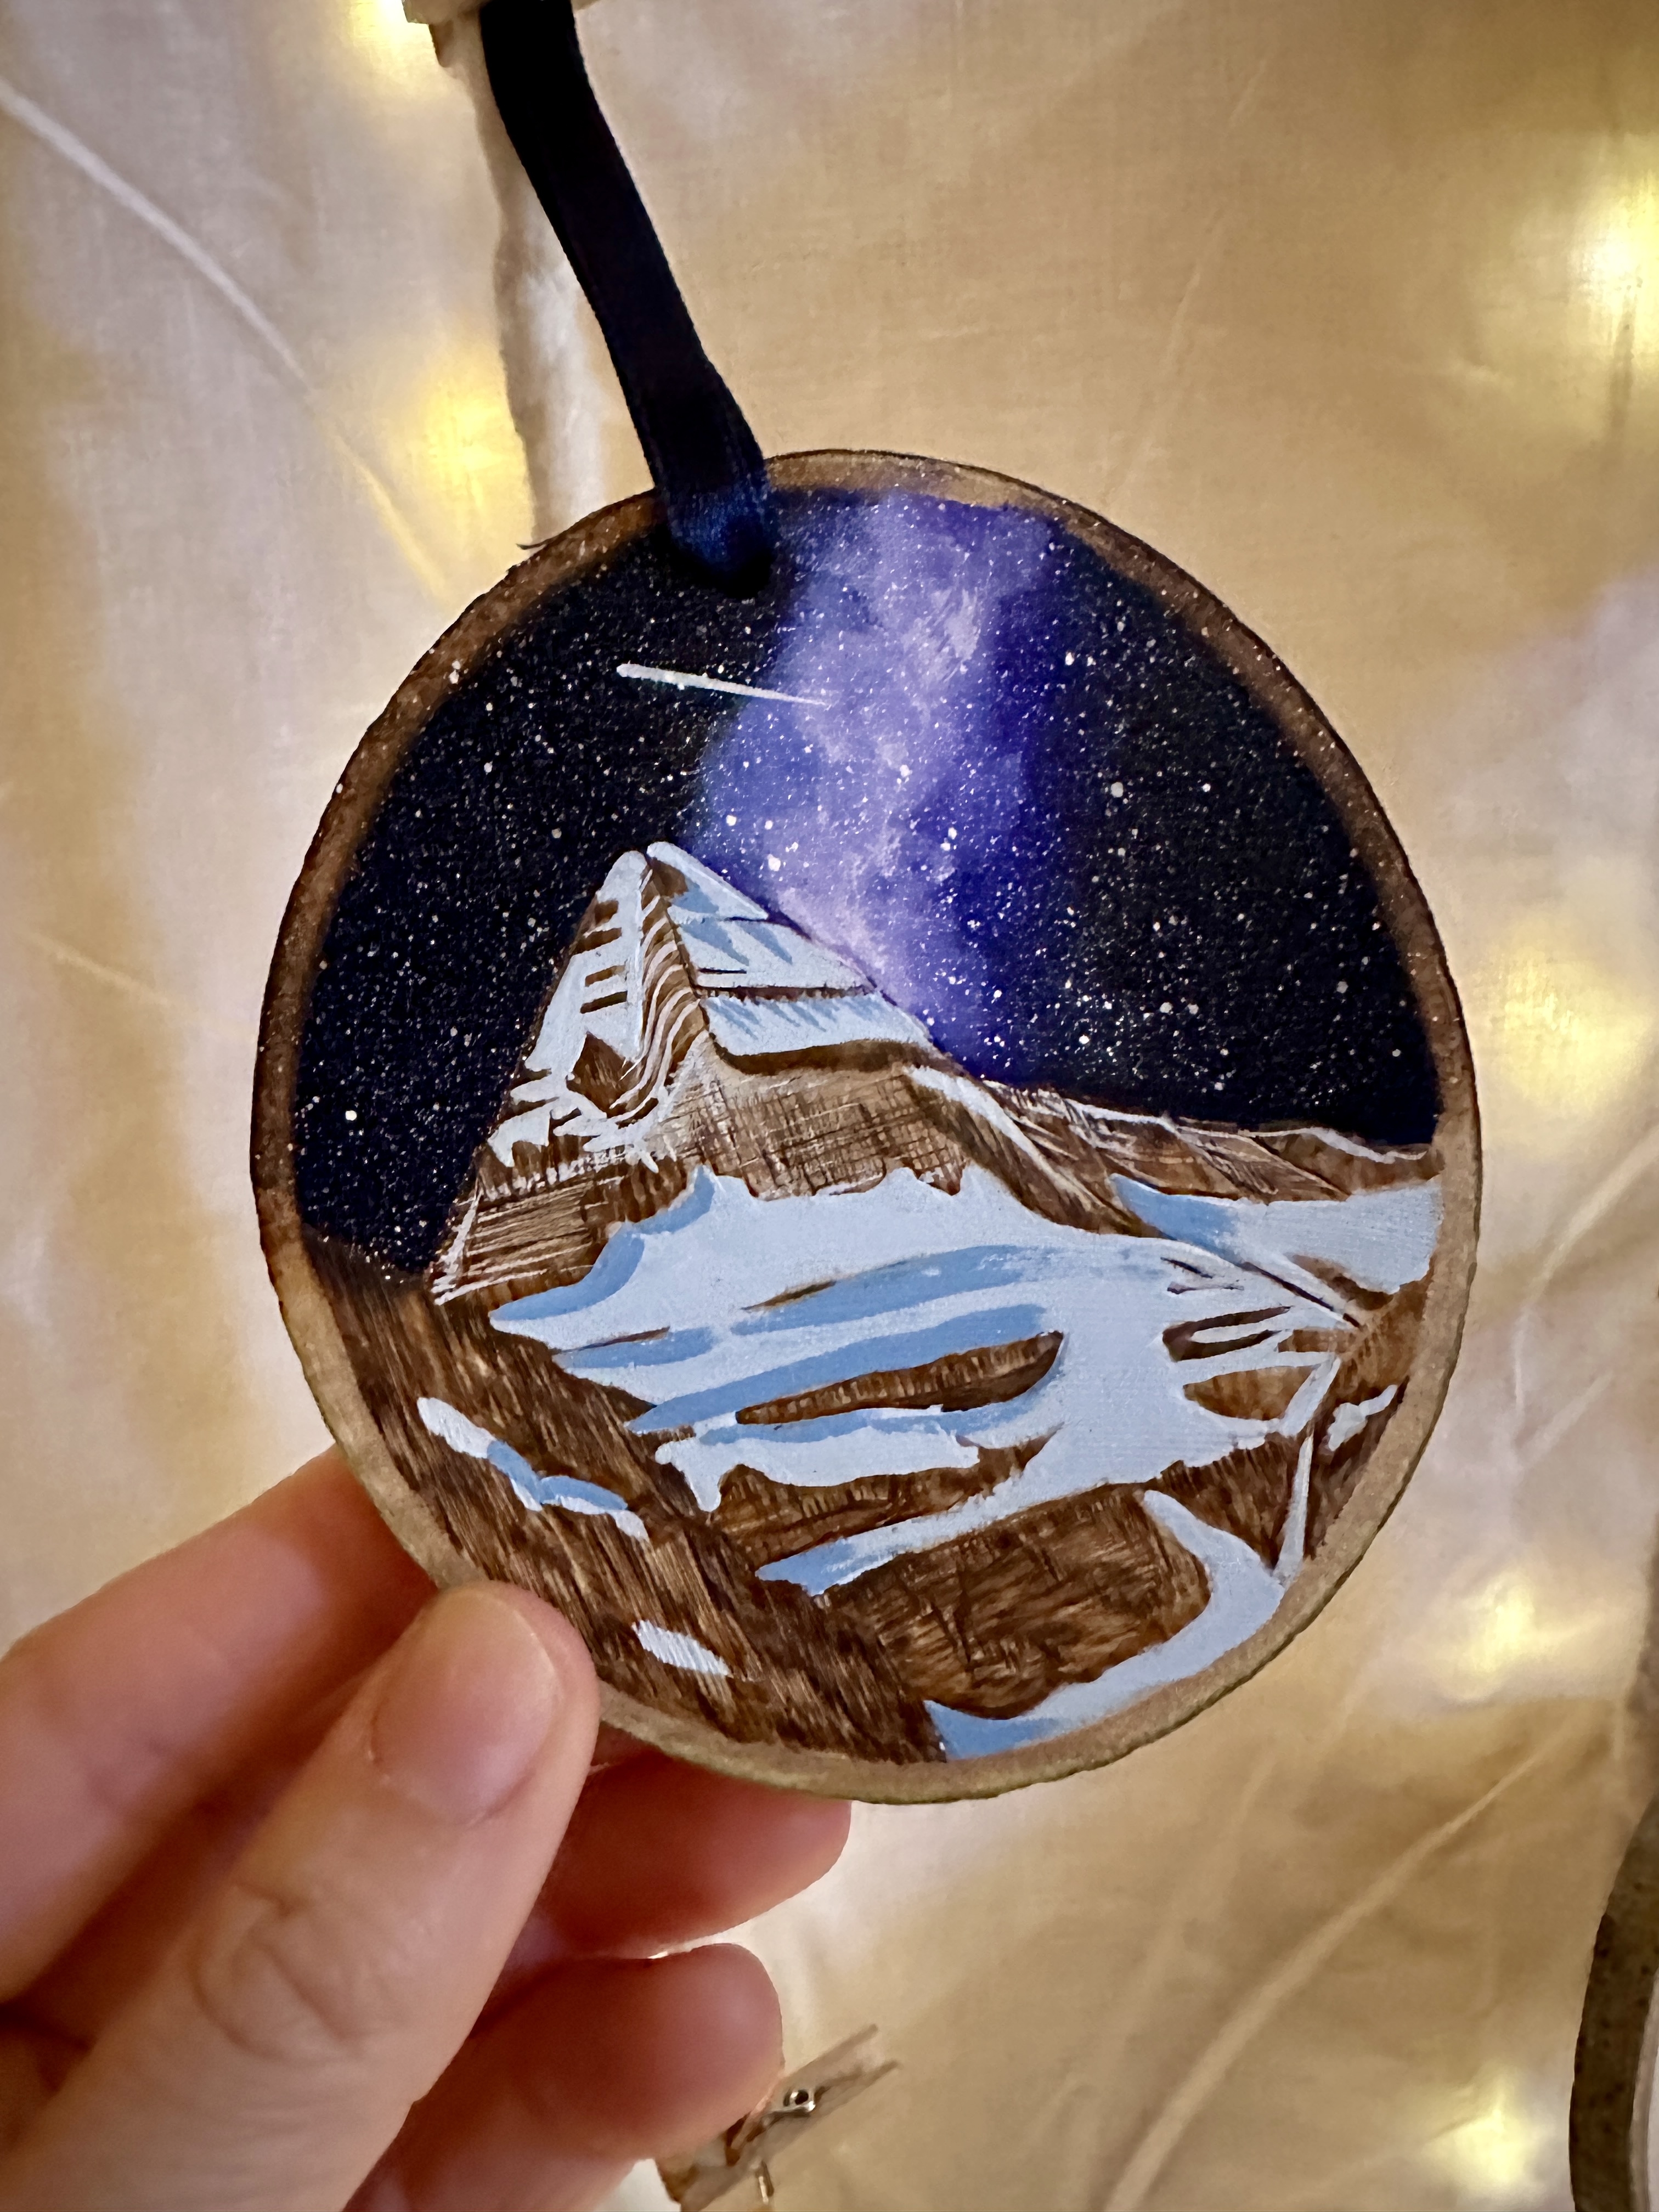 An ornament with a snow capped mountain on it.